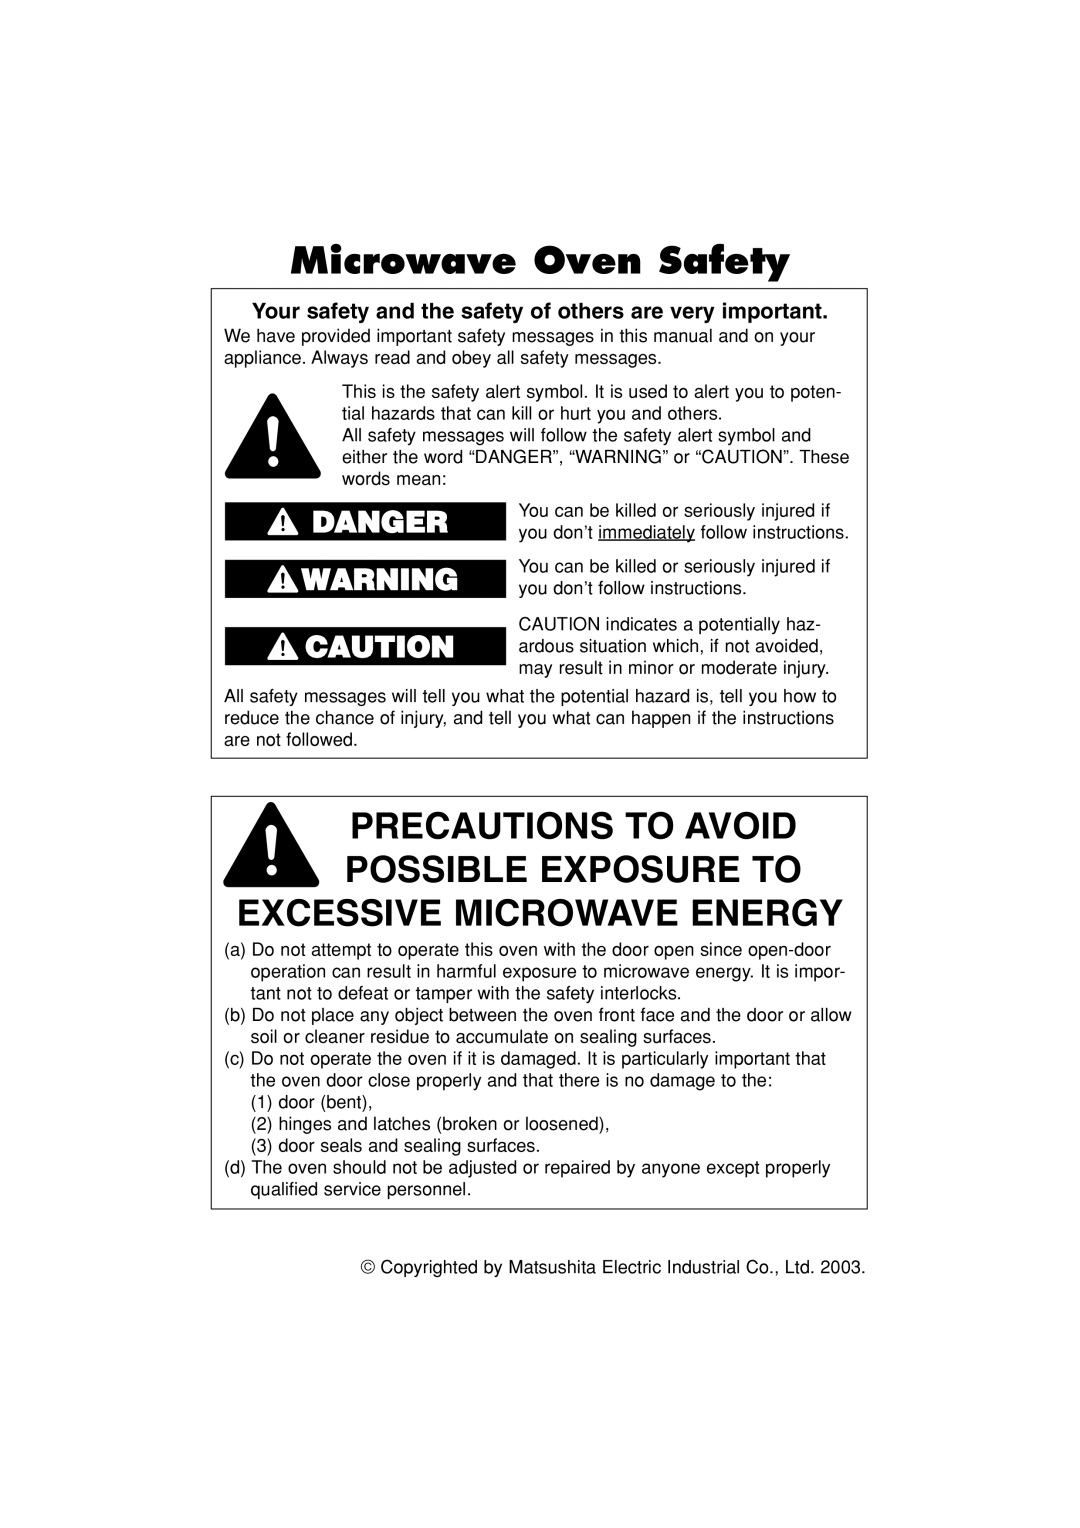 Panasonic NN-S533 Precautions To Avoid, Possible Exposure To Excessive Microwave Energy, Microwave Oven Safety, Danger 